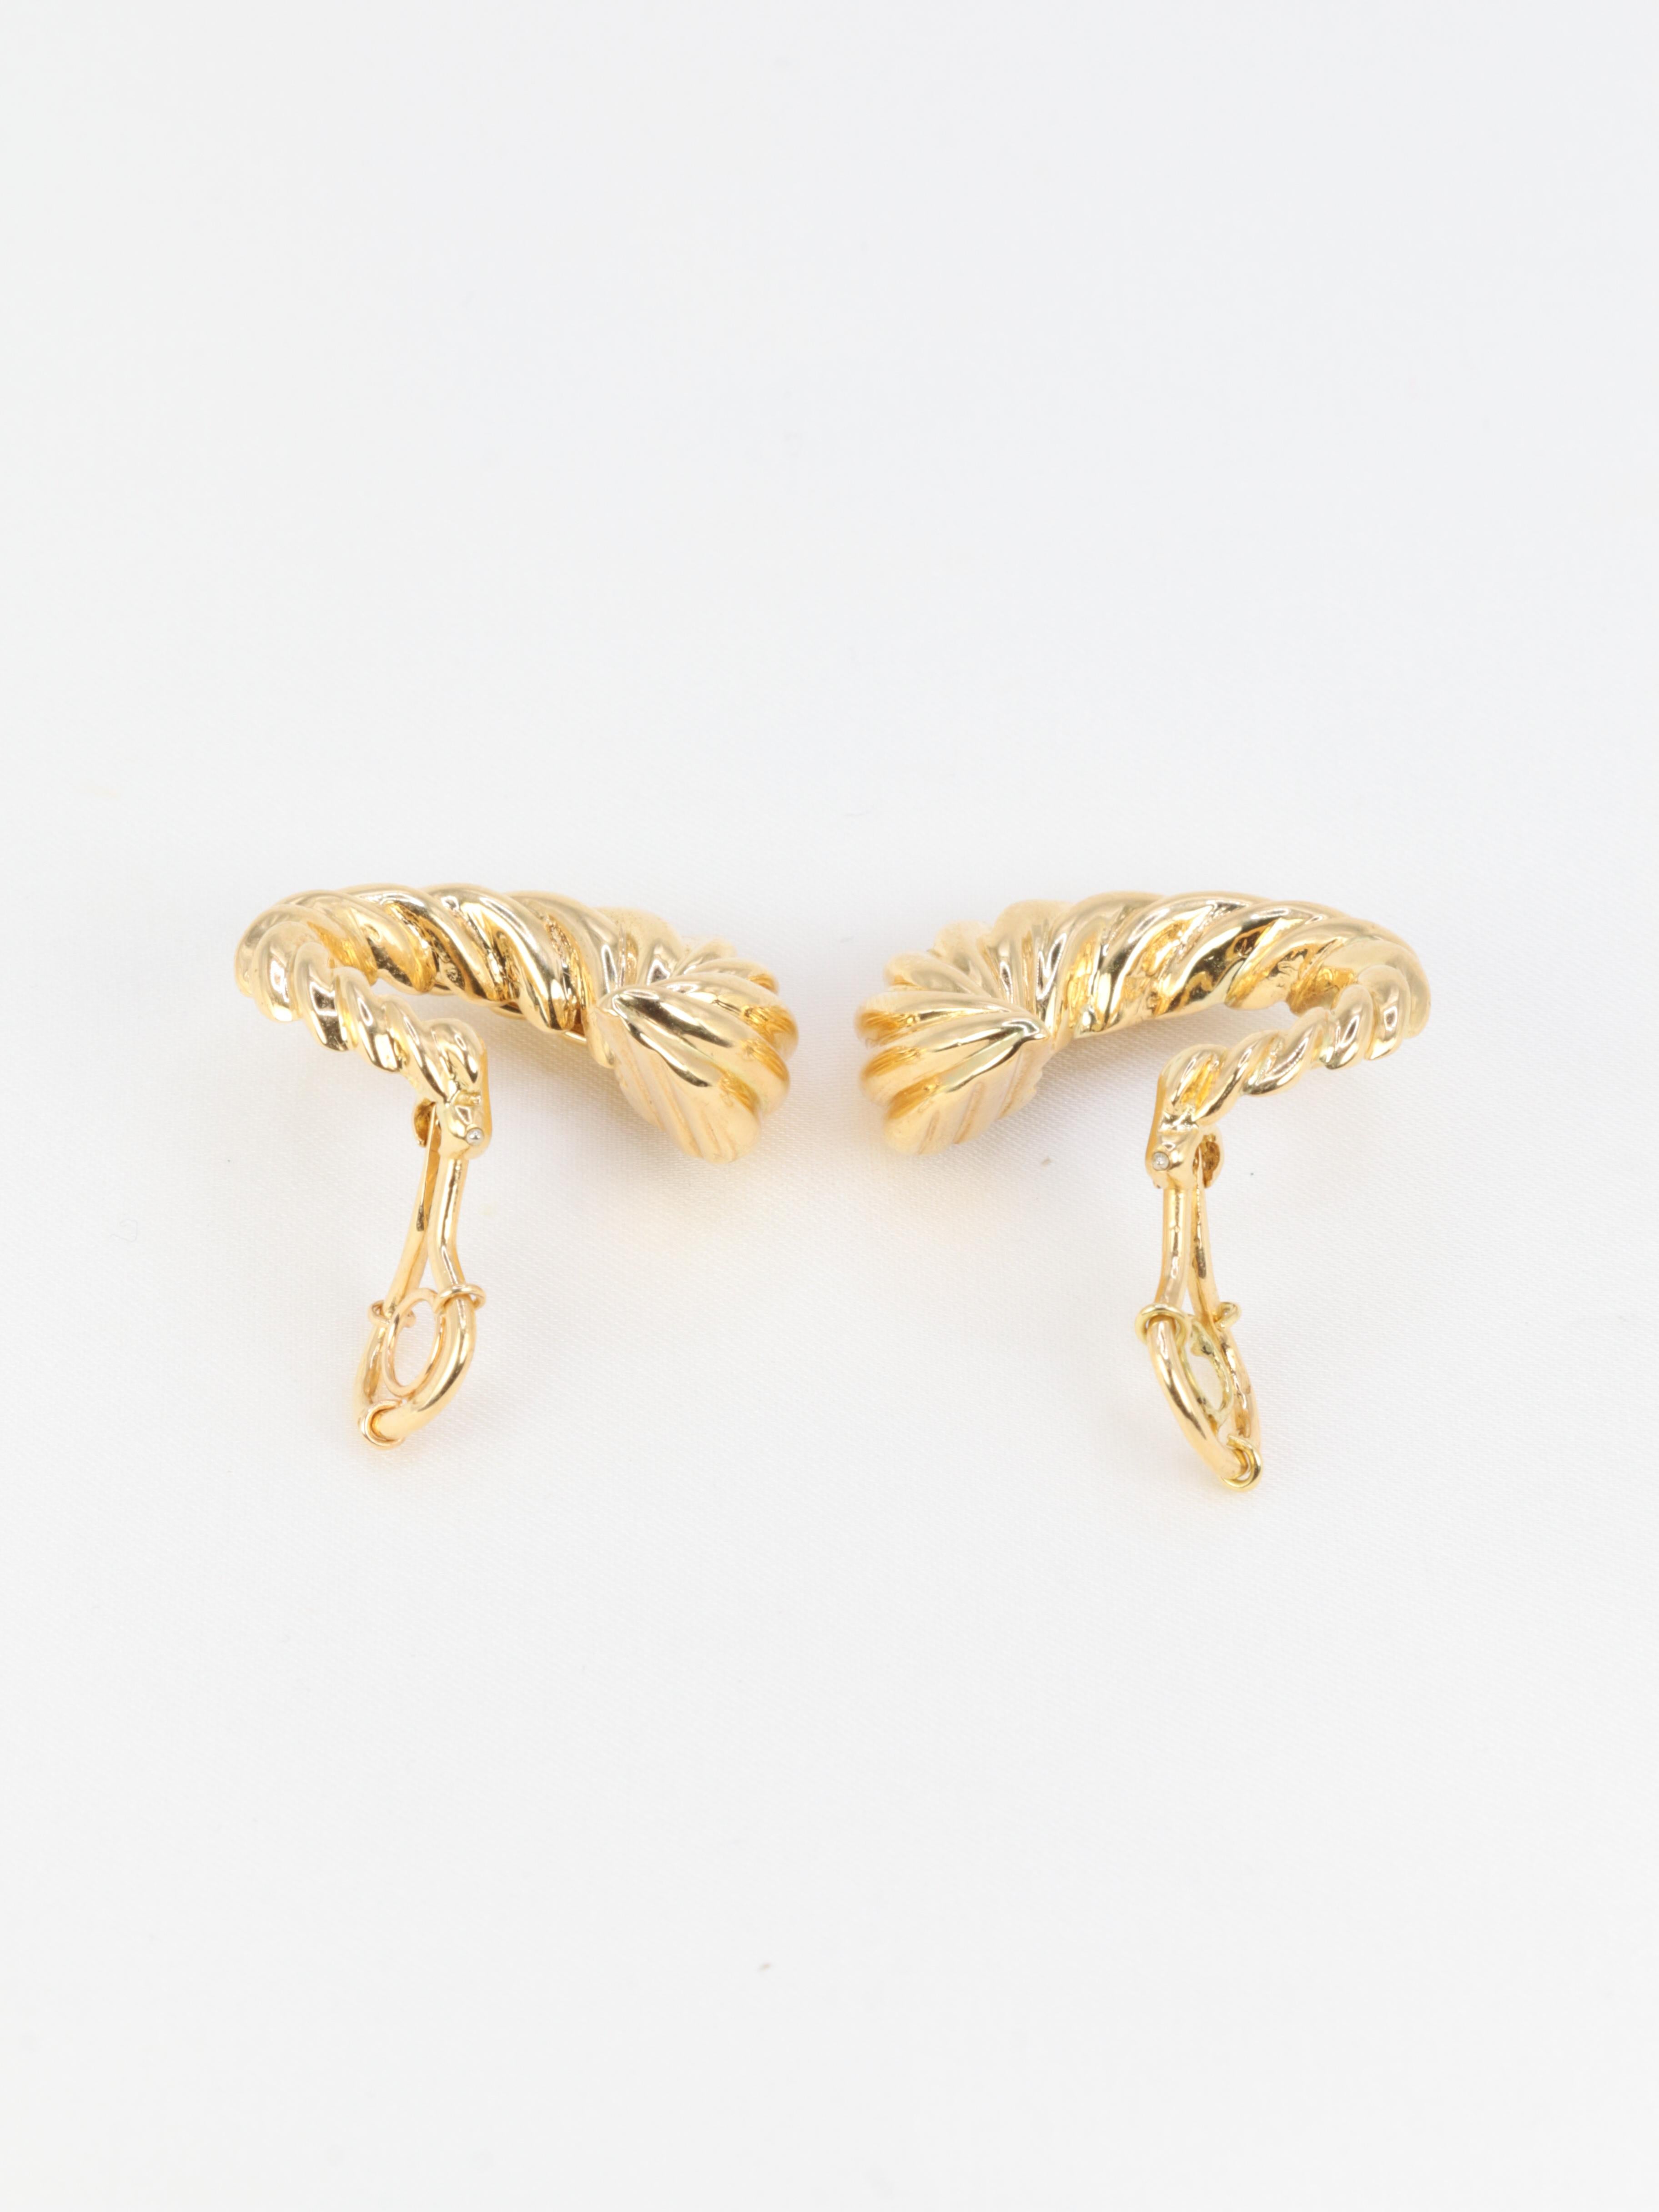 Pair of Vintage Ear Clips in Yellow Gold 1